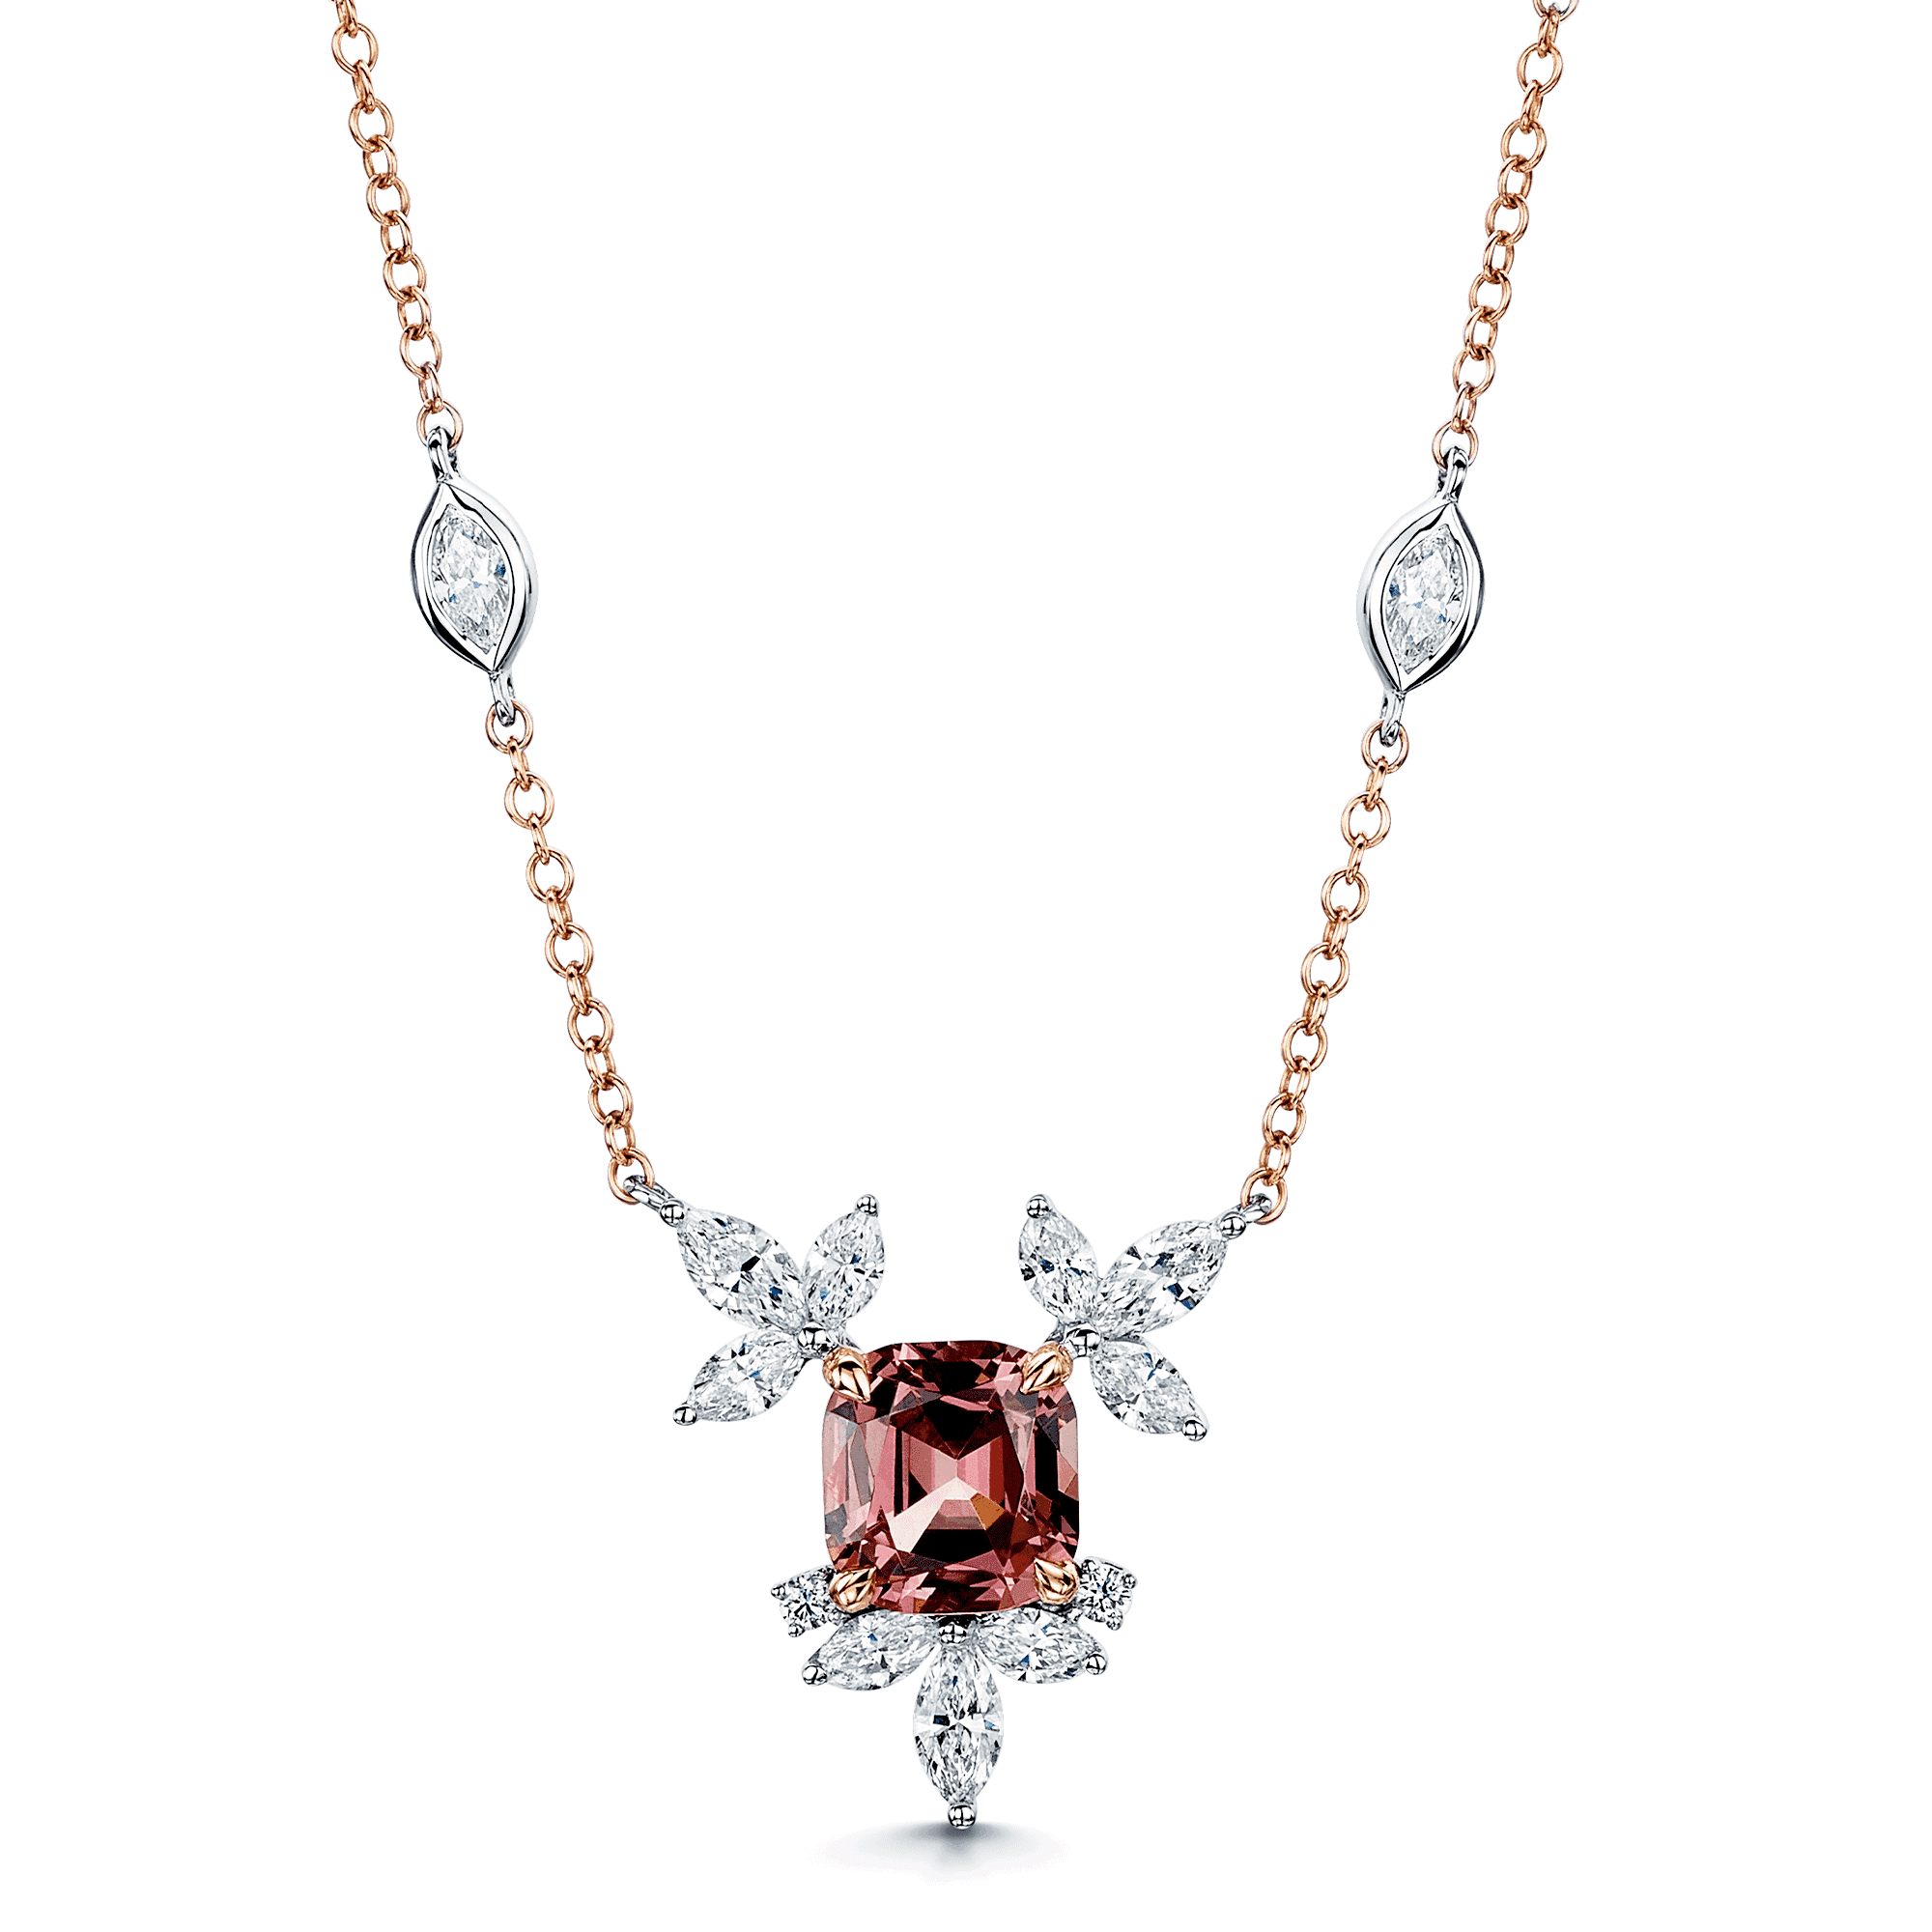 18ct Rose & White Gold Malayan Garnet Marquise Diamond Flower Necklace With Marquise Cut Diamond Set Chain